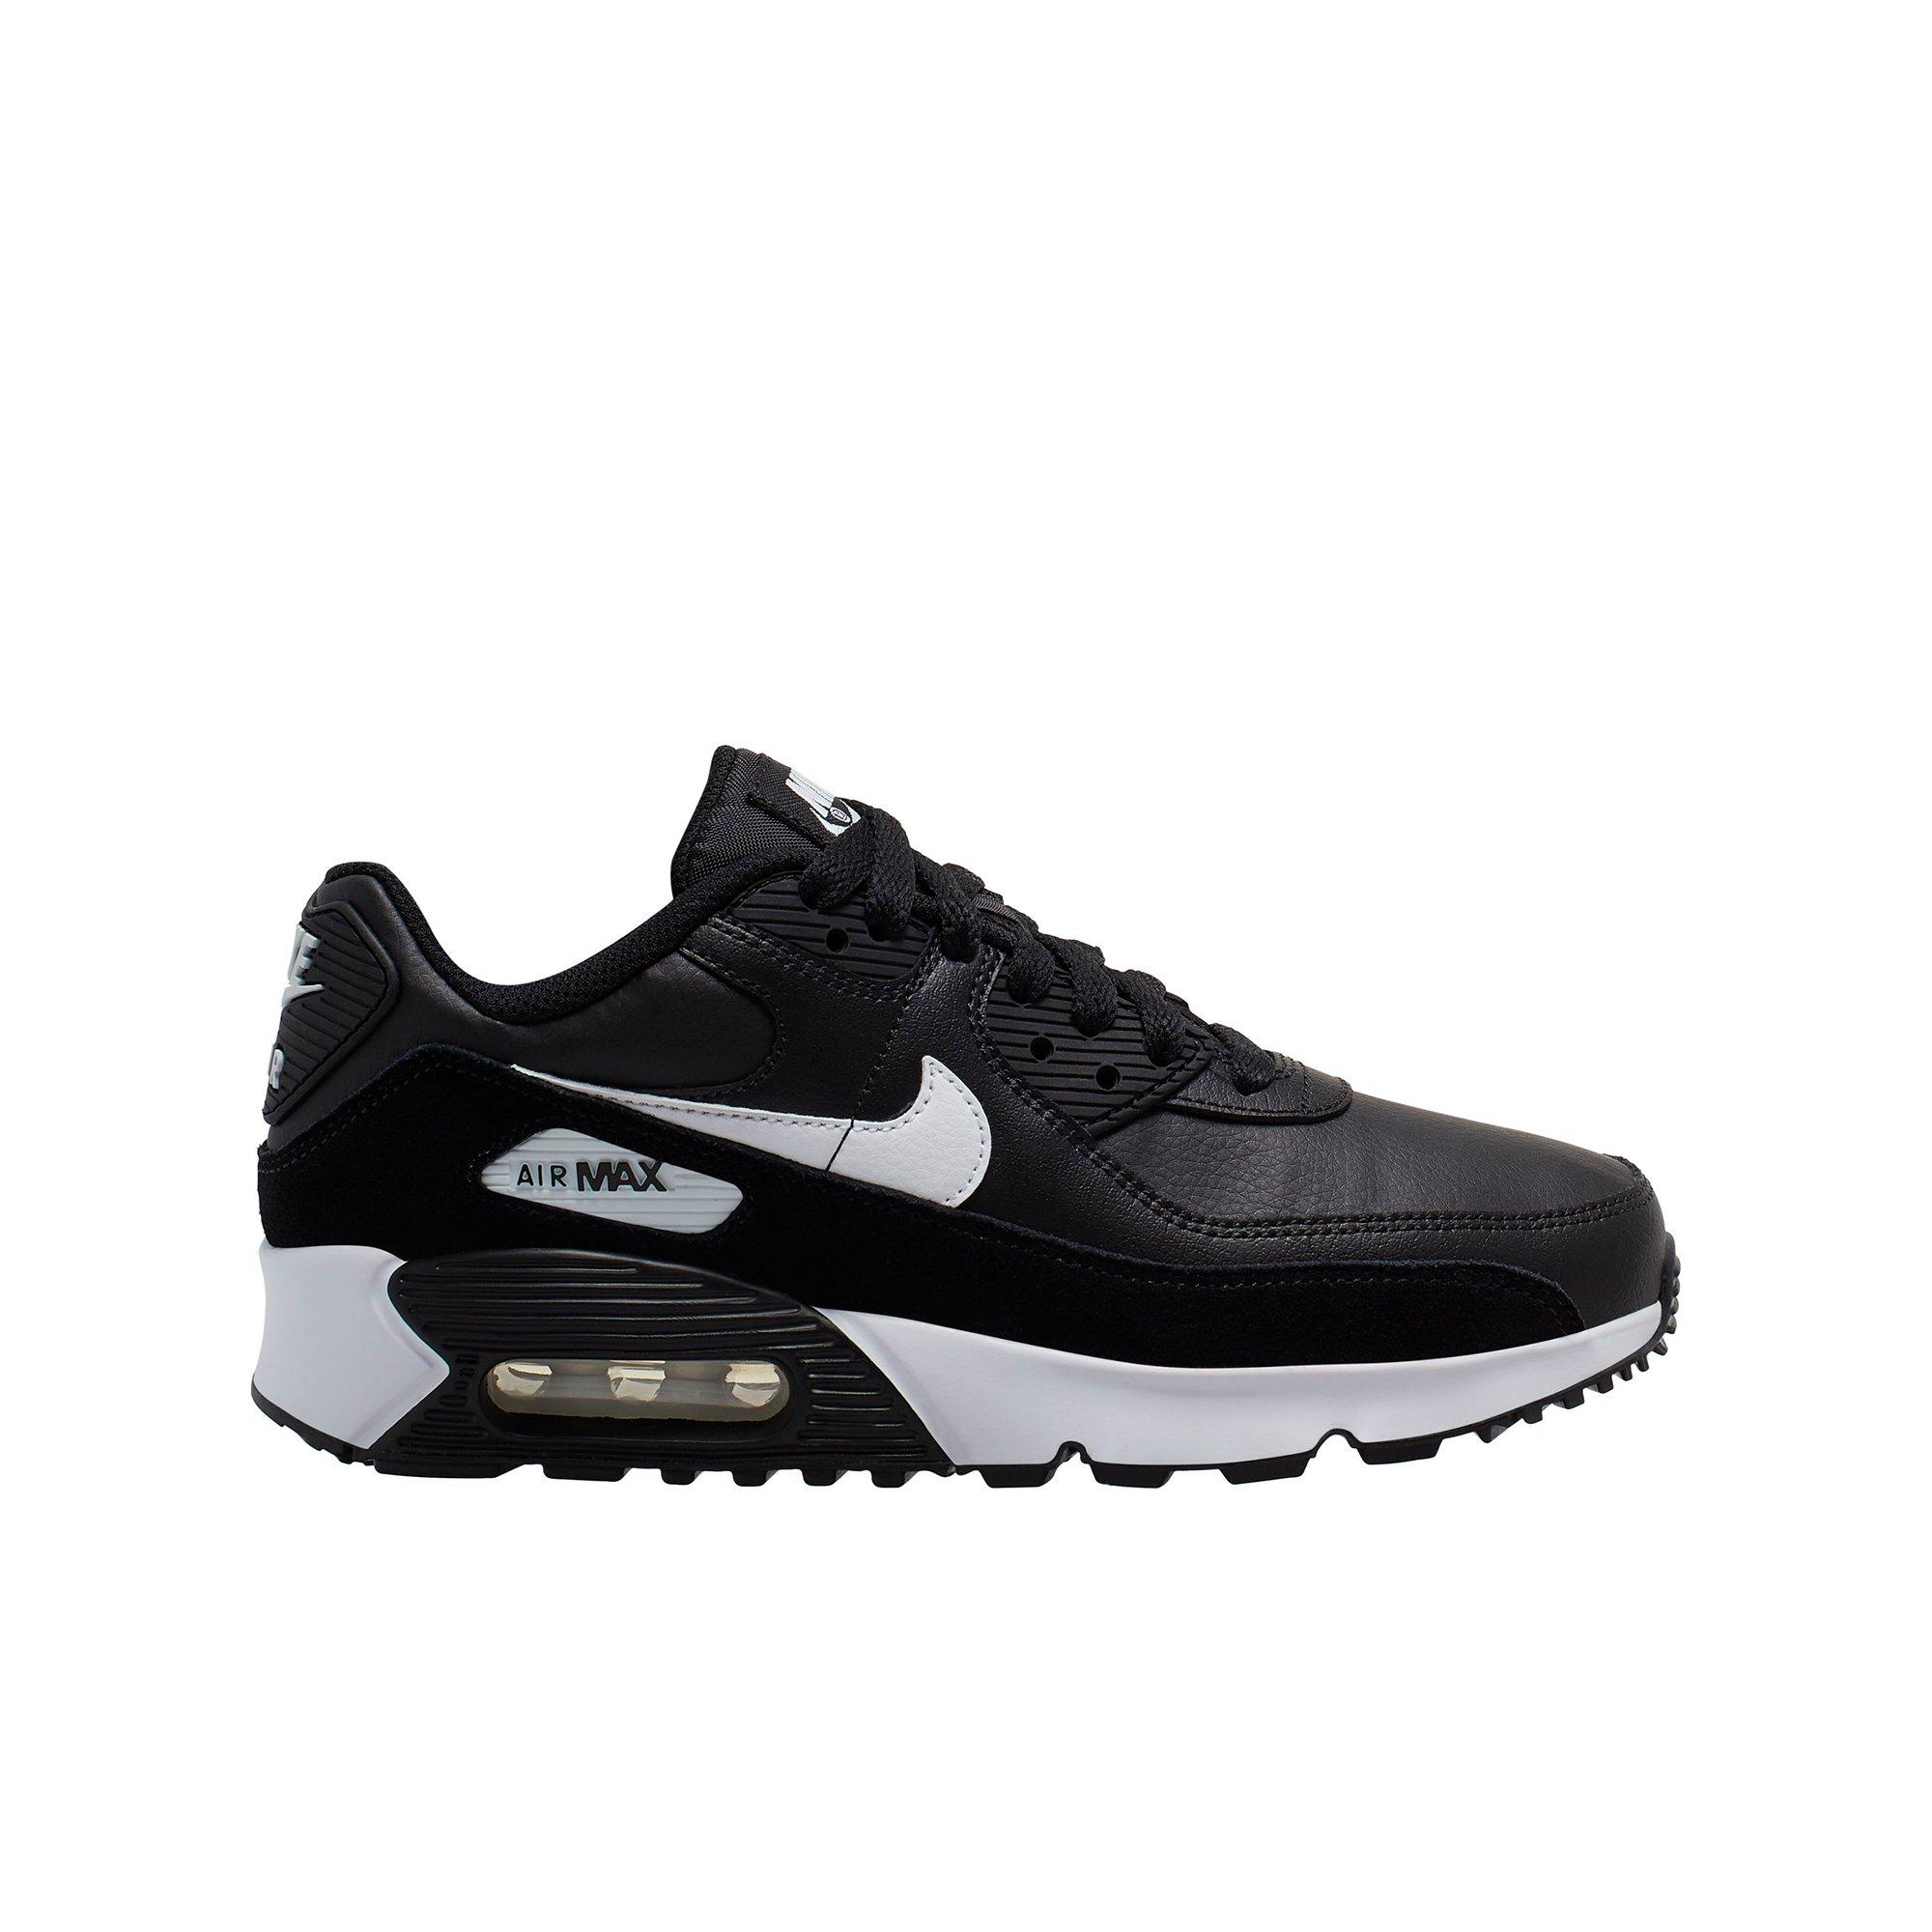 nike air max 90 ltr black and white